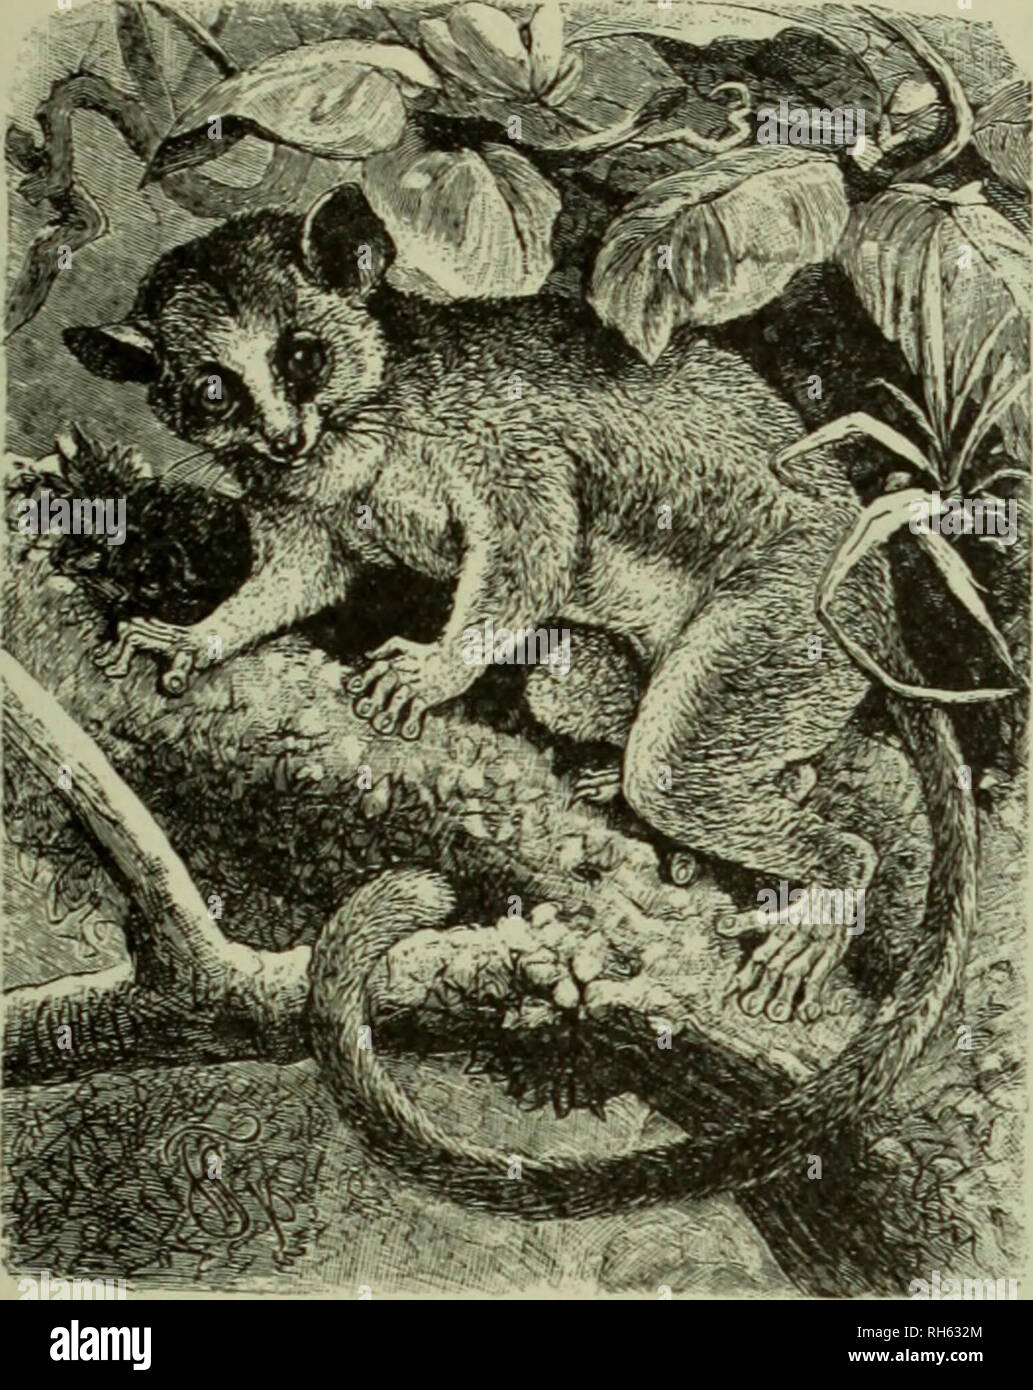 Brehm's Life of animals : a complete natural history for popular home  instruction and for the use of schools. Mammalia. Mammals; Animal behavior.  THE AVE-AVE. 73 The natives regard him as